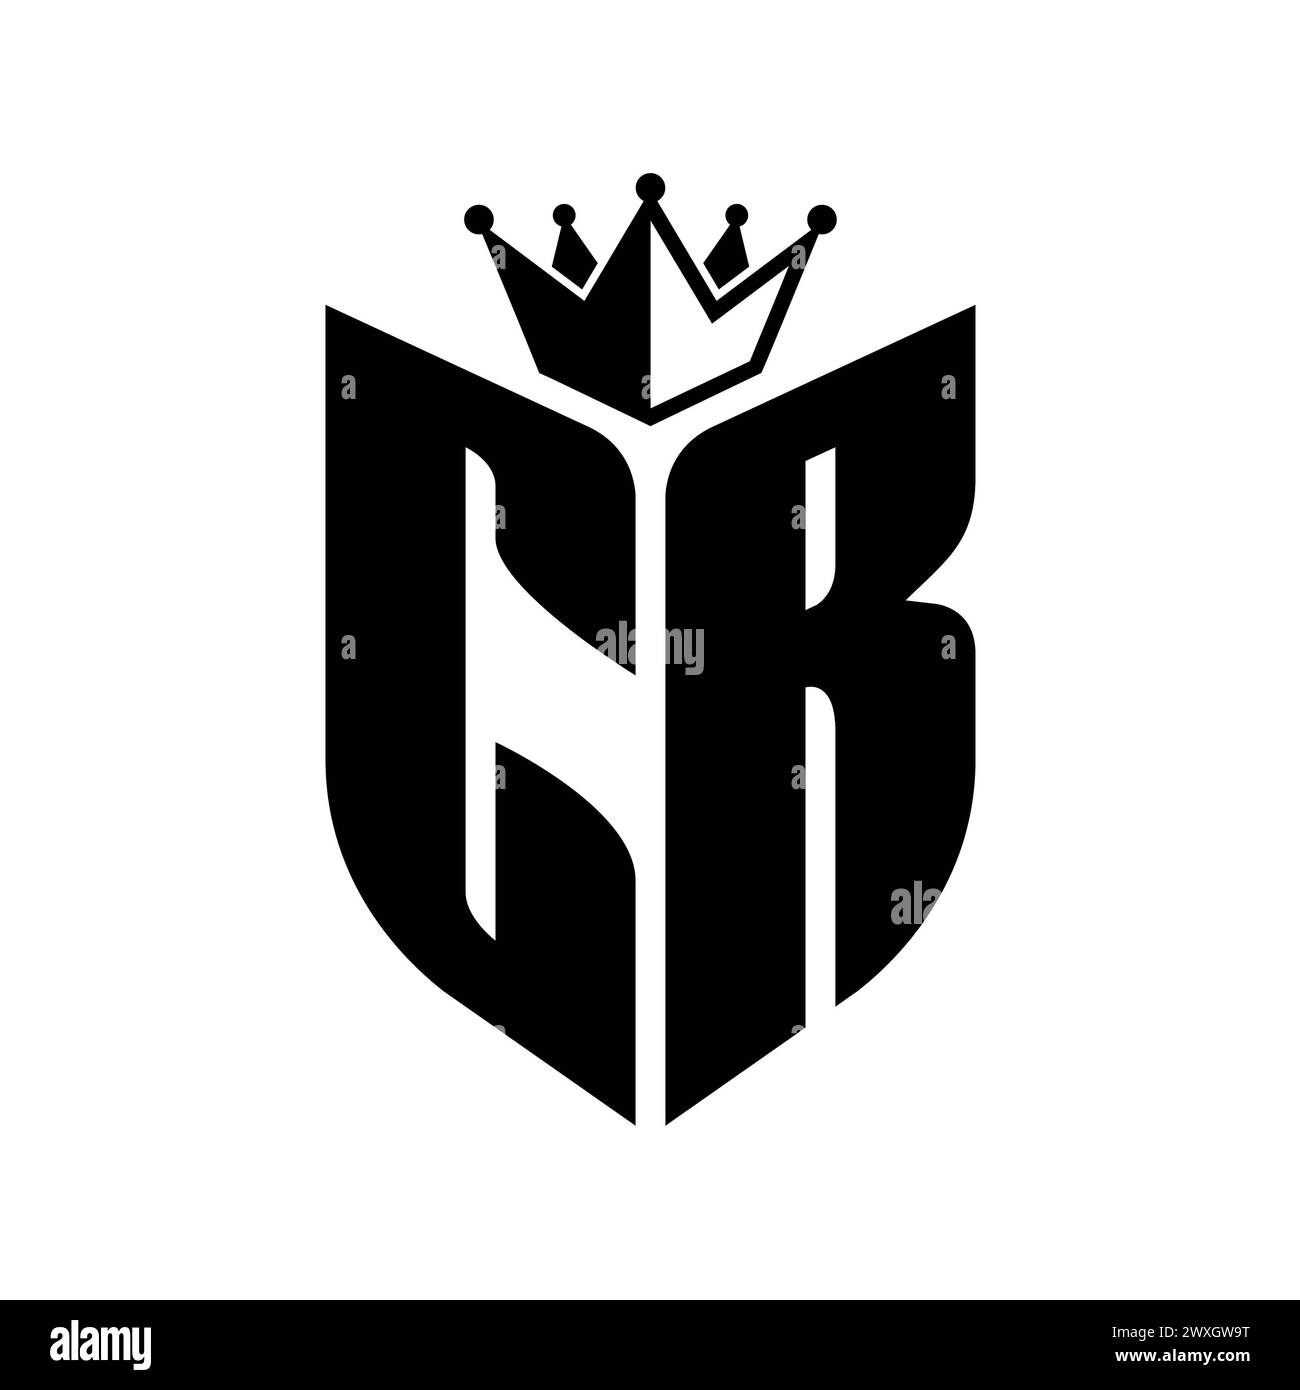 CR Letter monogram with shield shape with crown black and white color design template Stock Photo